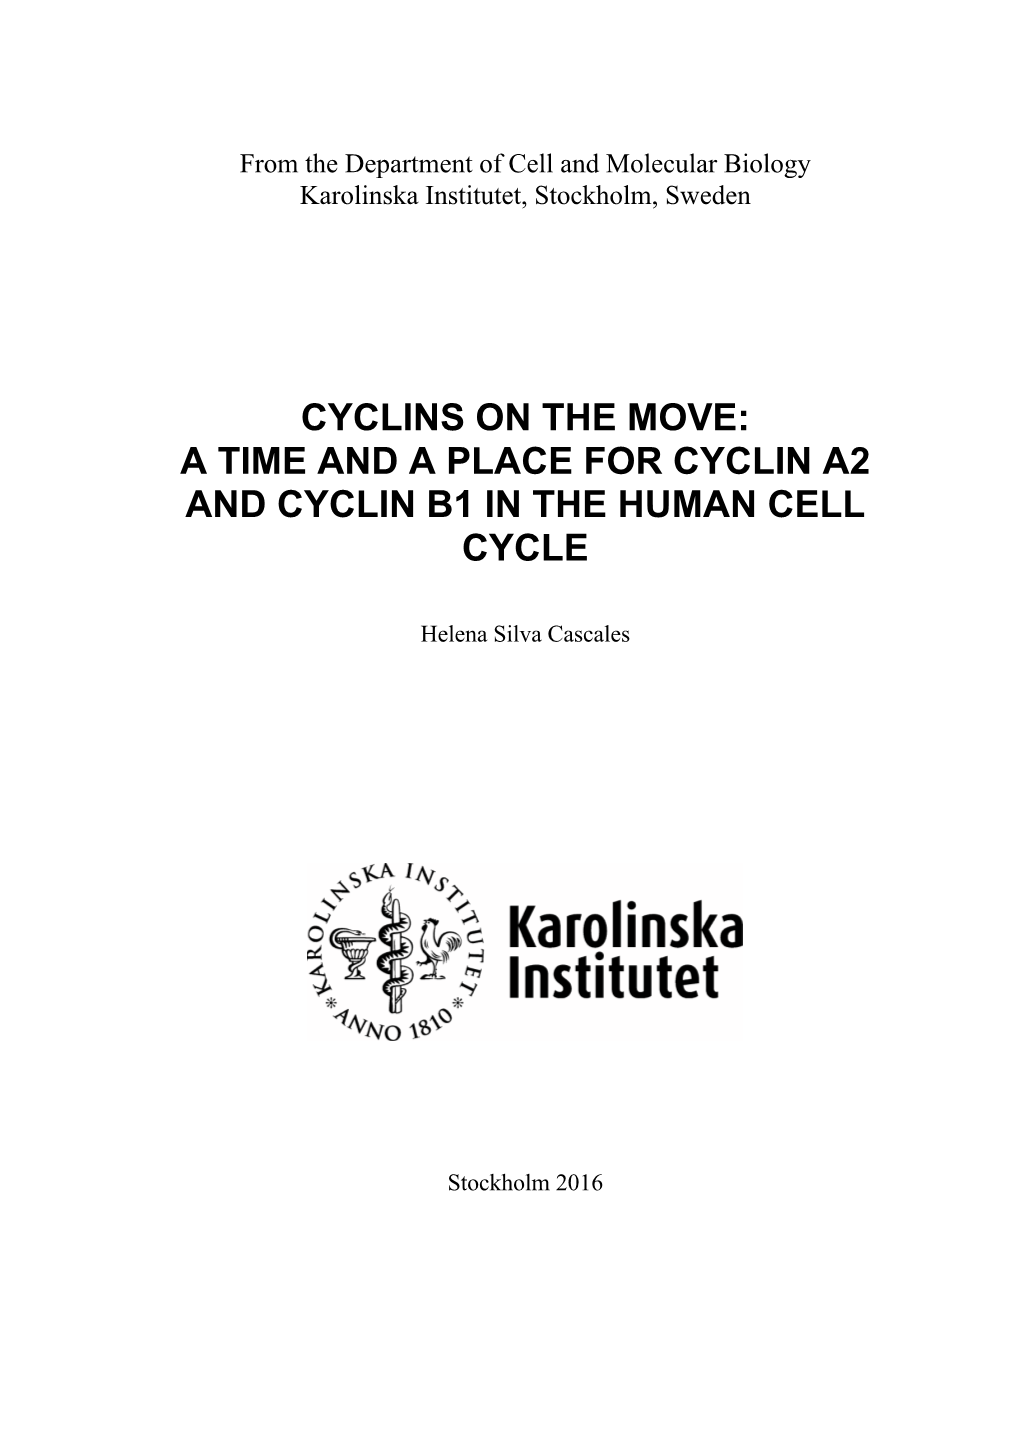 A Time and a Place for Cyclin A2 and Cyclin B1 in the Human Cell Cycle